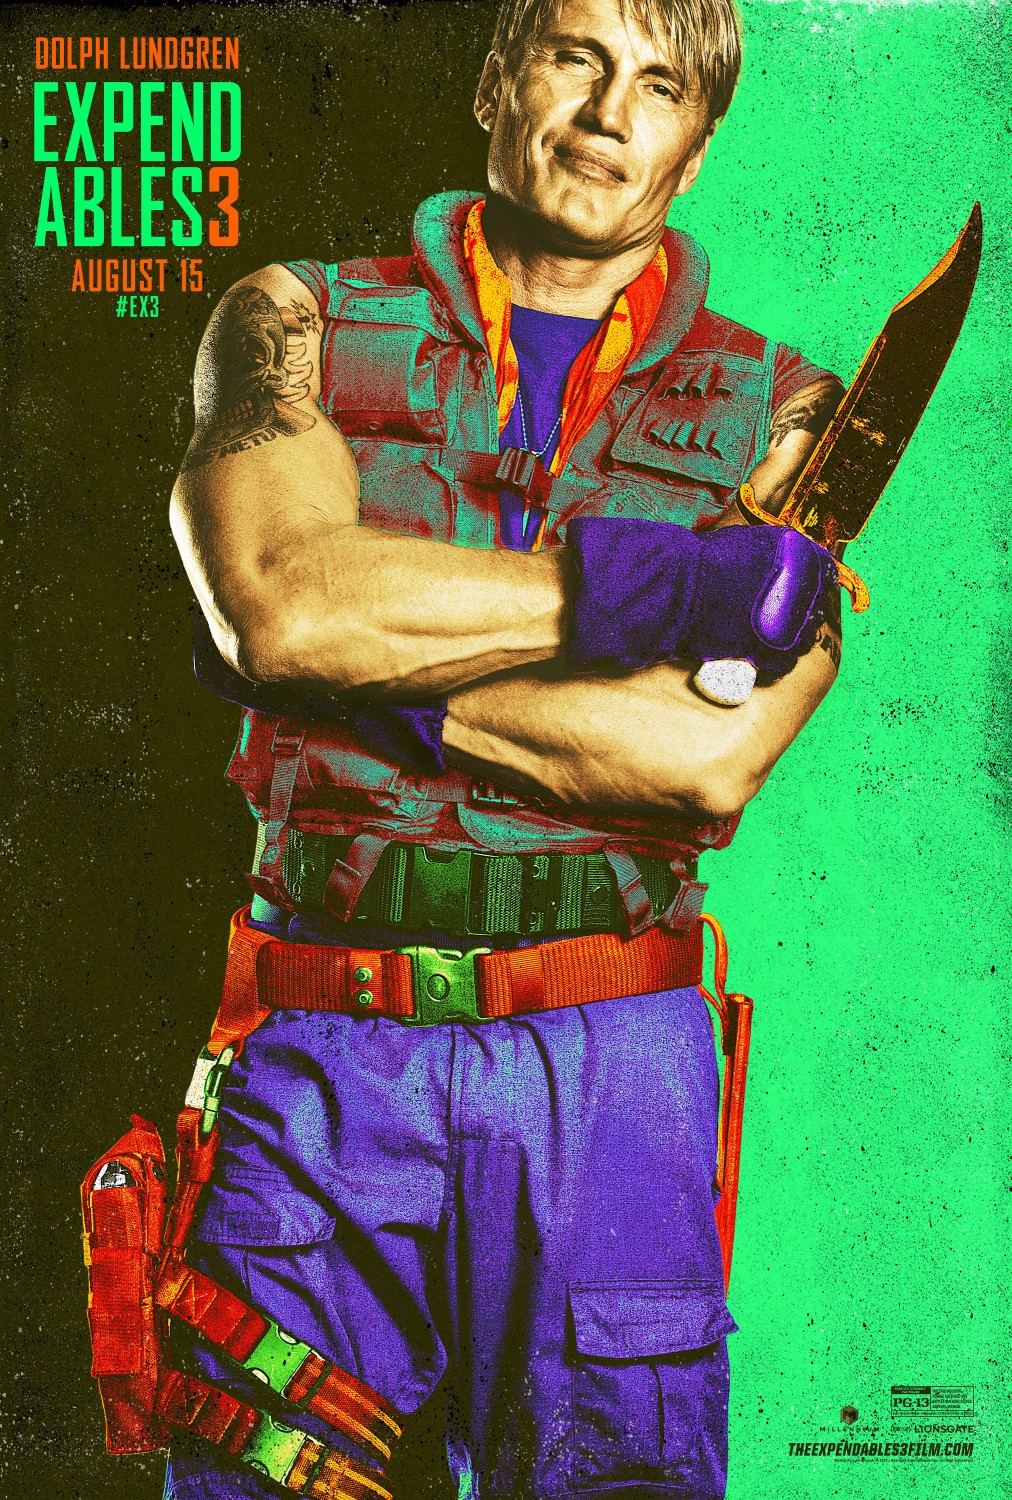 Extra Large Movie Poster Image for The Expendables 3 (#21 of 39)